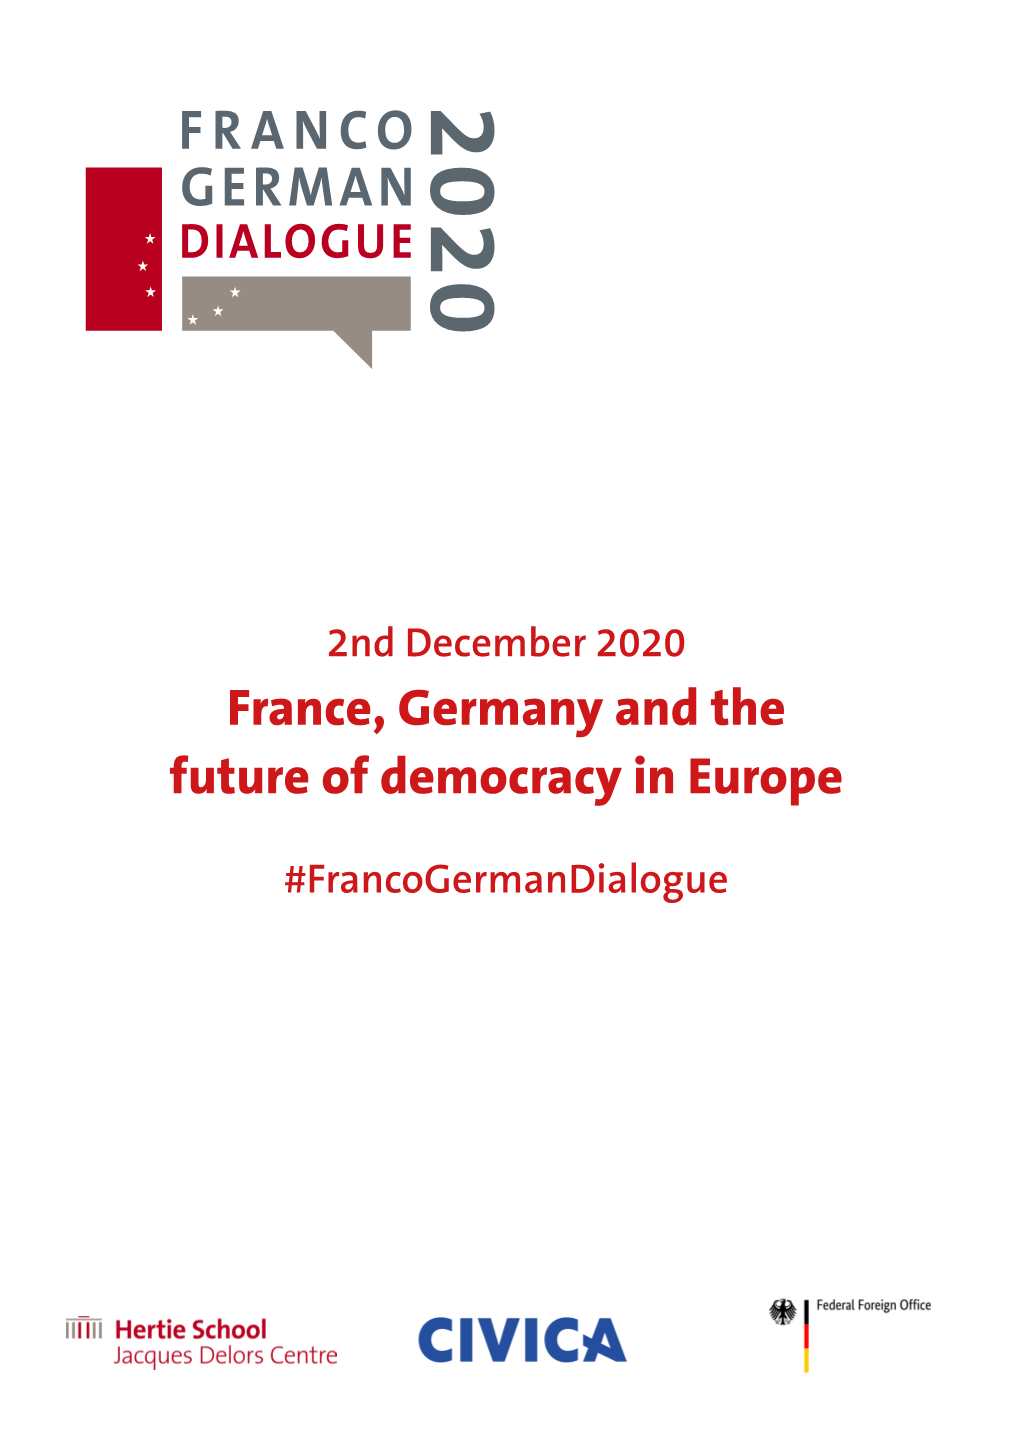 France, Germany and the Future of Democracy in Europe